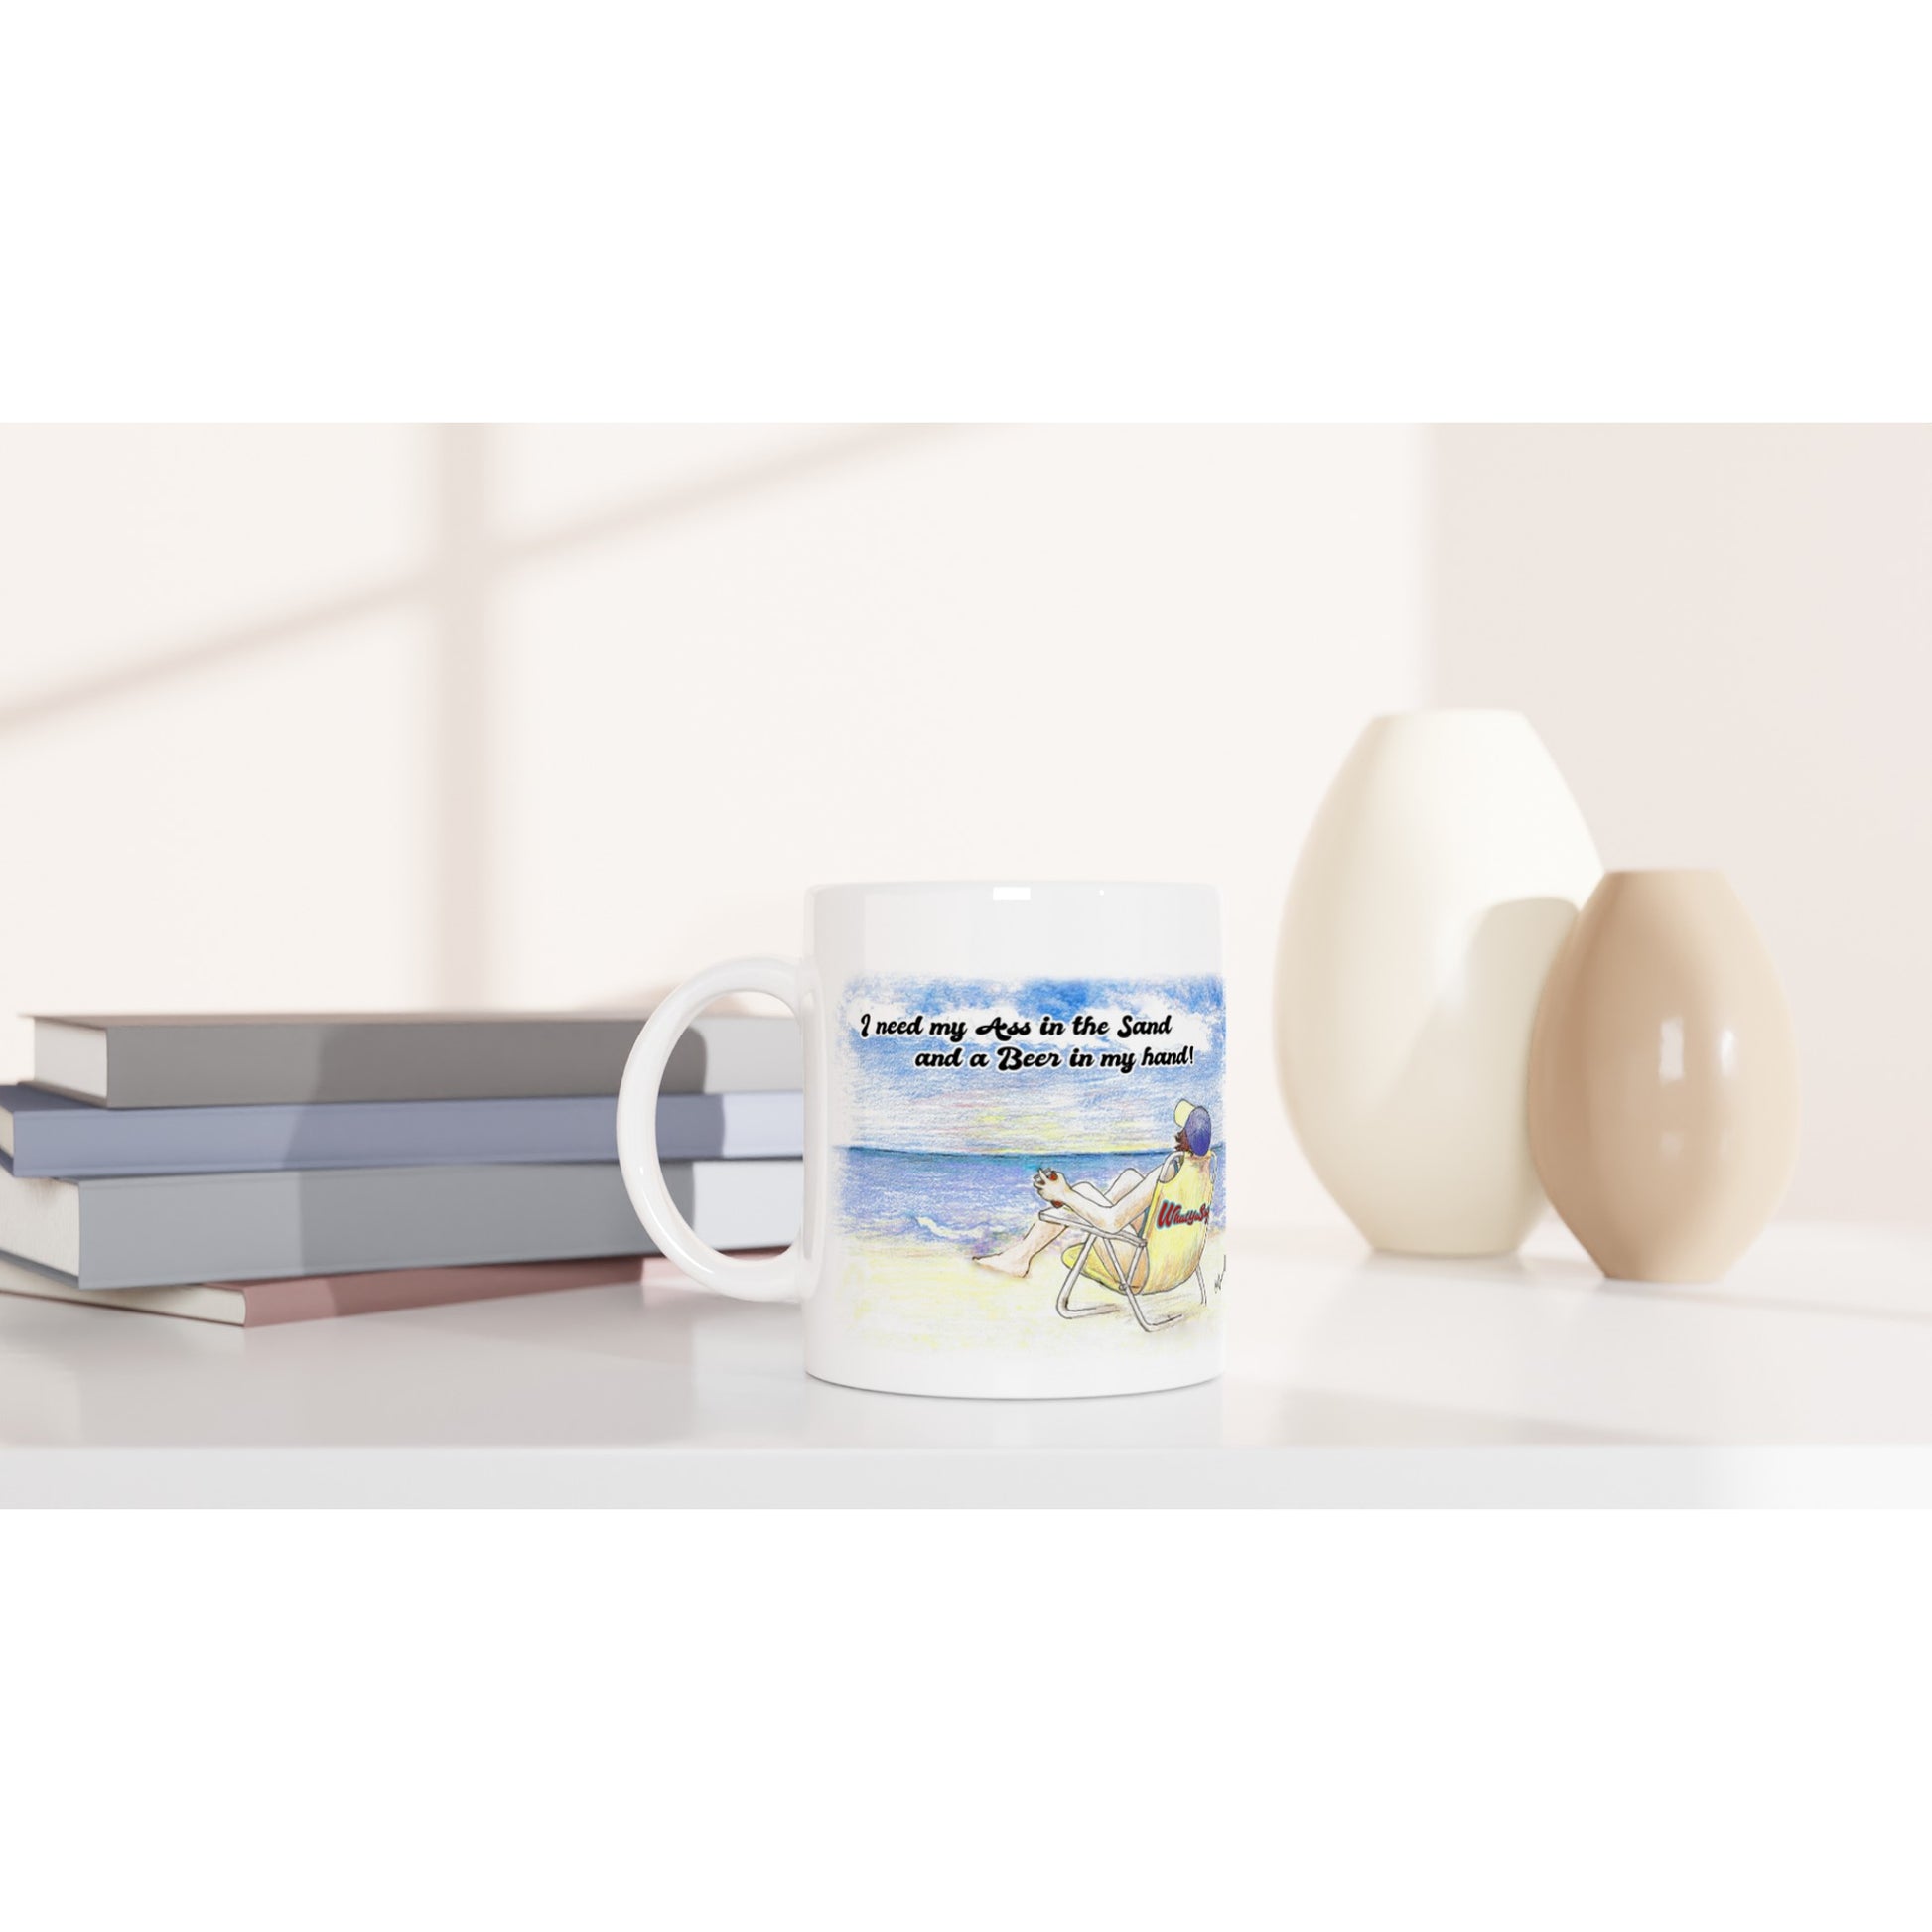 A white ceramic 11oz mug with motto I need my Ass in the Sand and a Beer in my hand on front and WhatYa Say logo on back dishwasher and microwave safe from WhatYa Say Apparel sitting on coffee table with books and two vases.